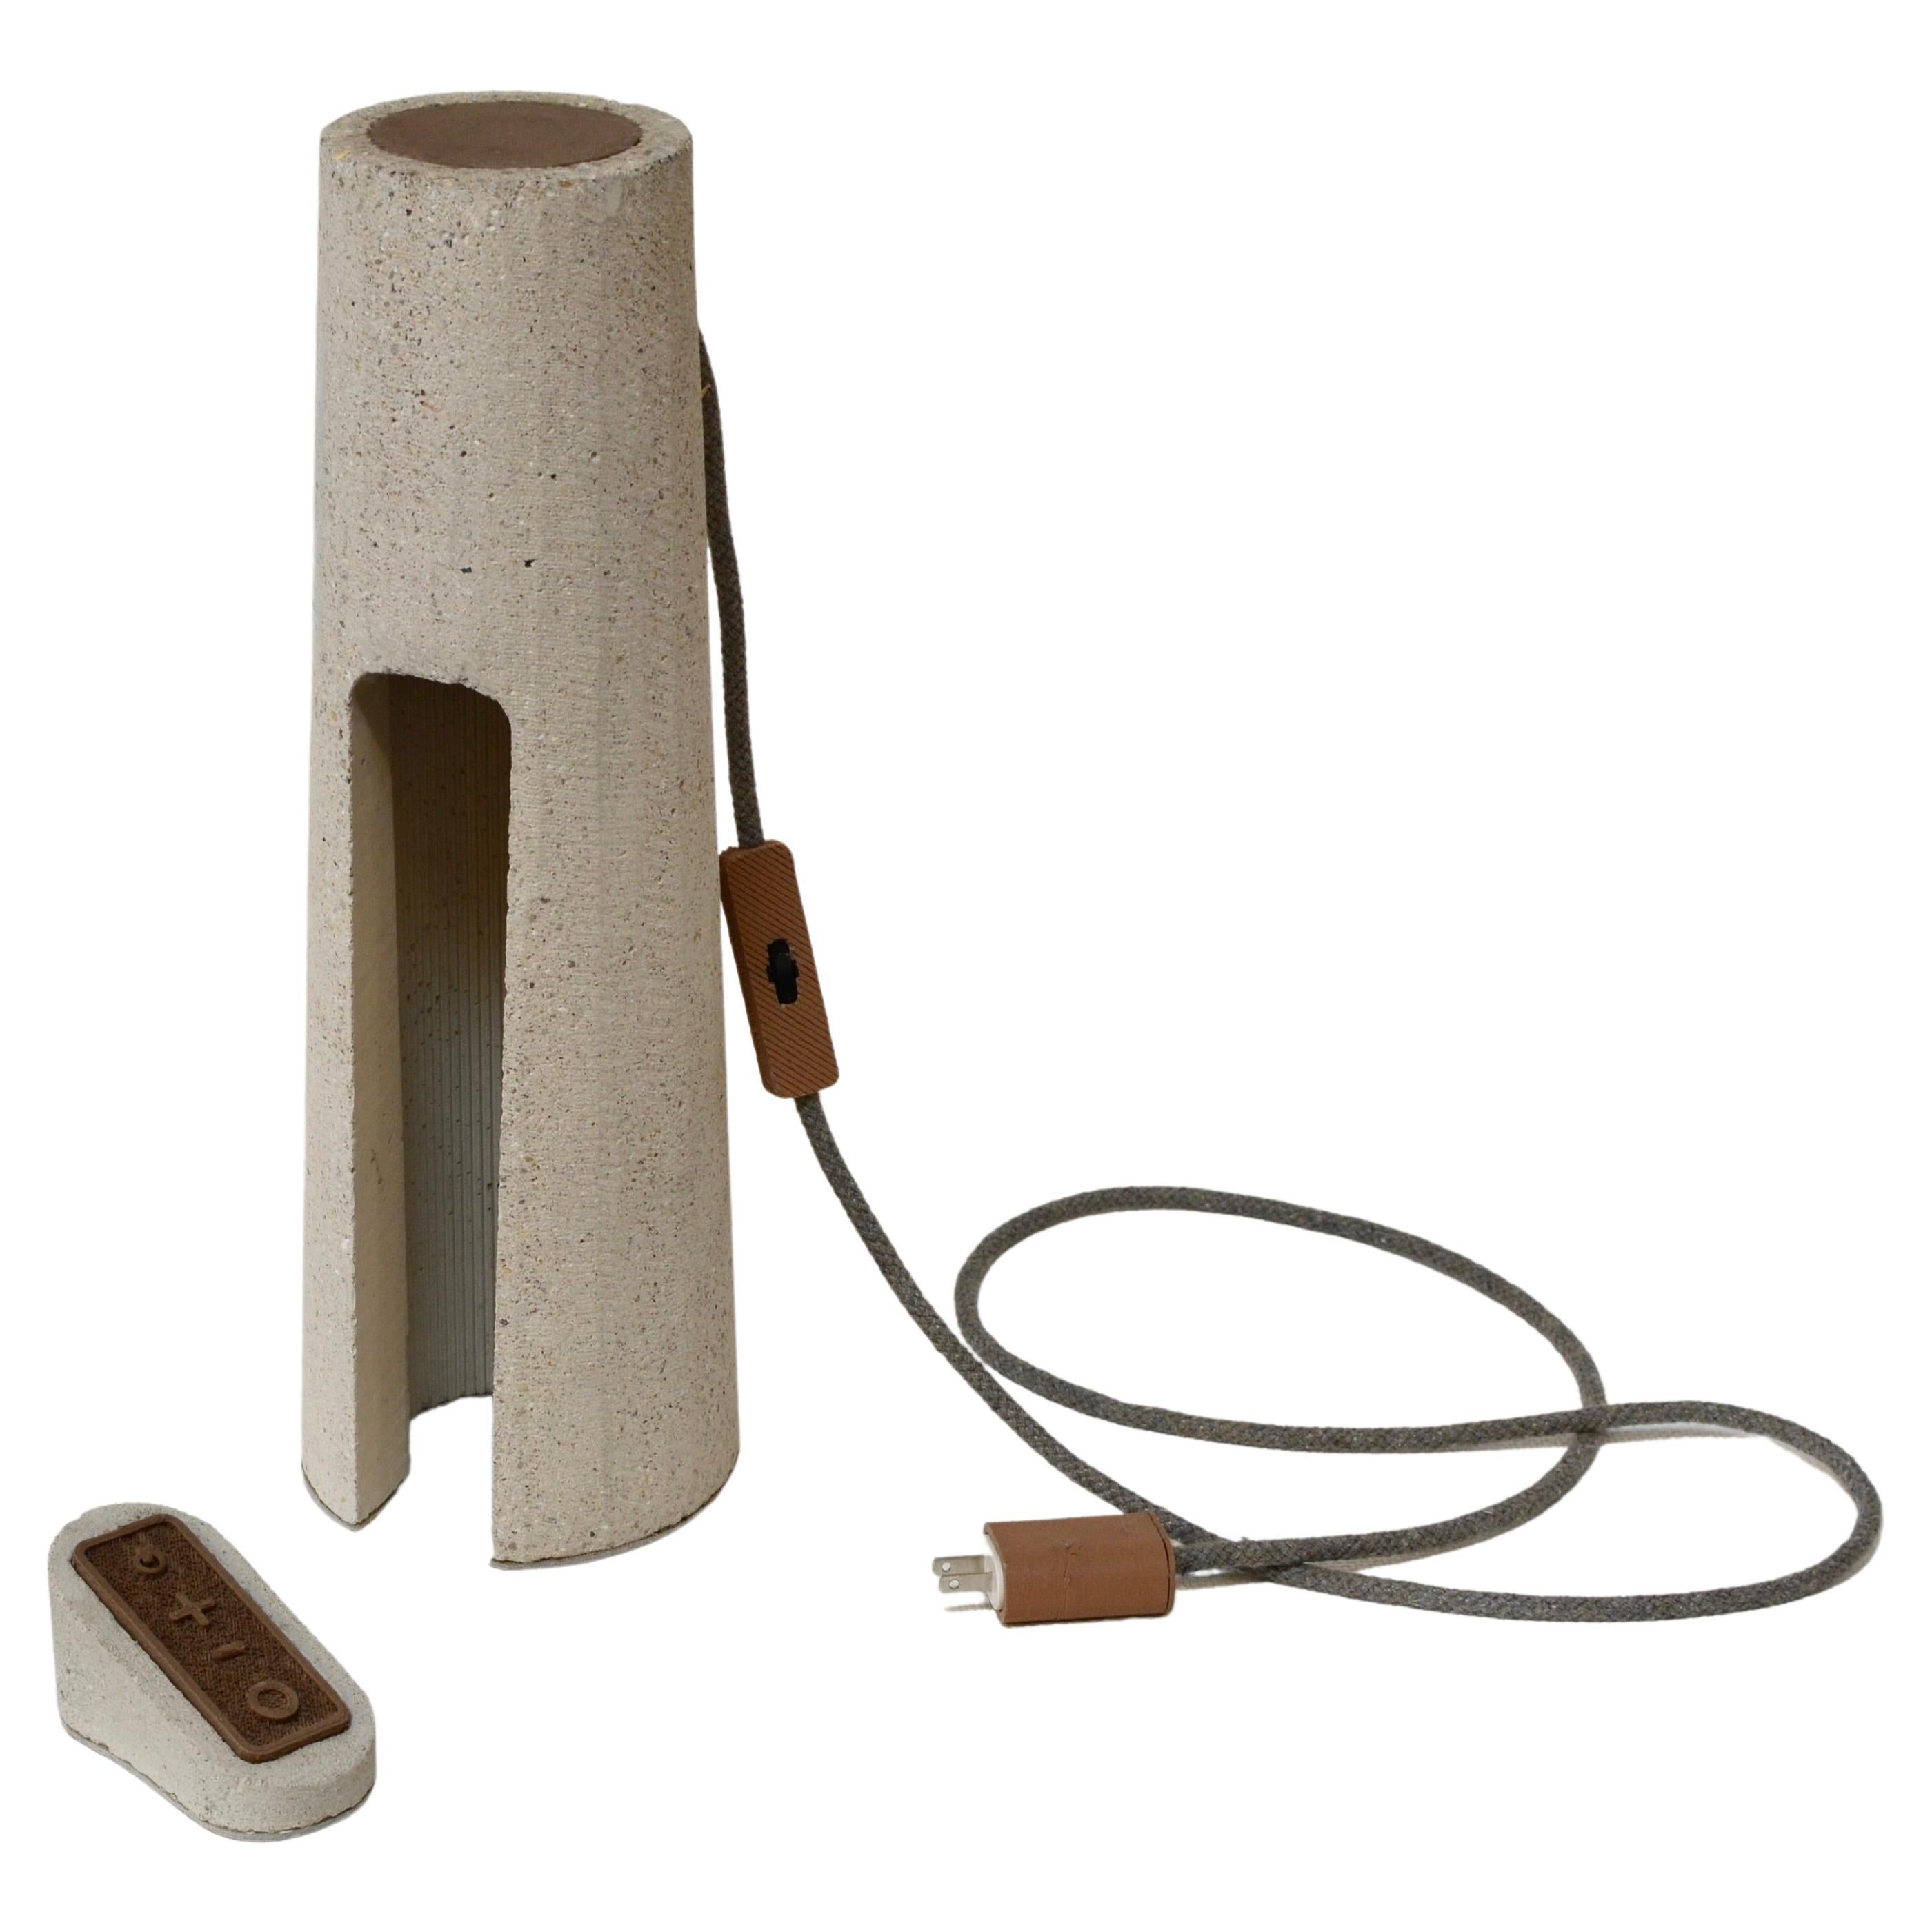 Contemporary Sculptural Sustainable Concrete Lamp by James Haywood